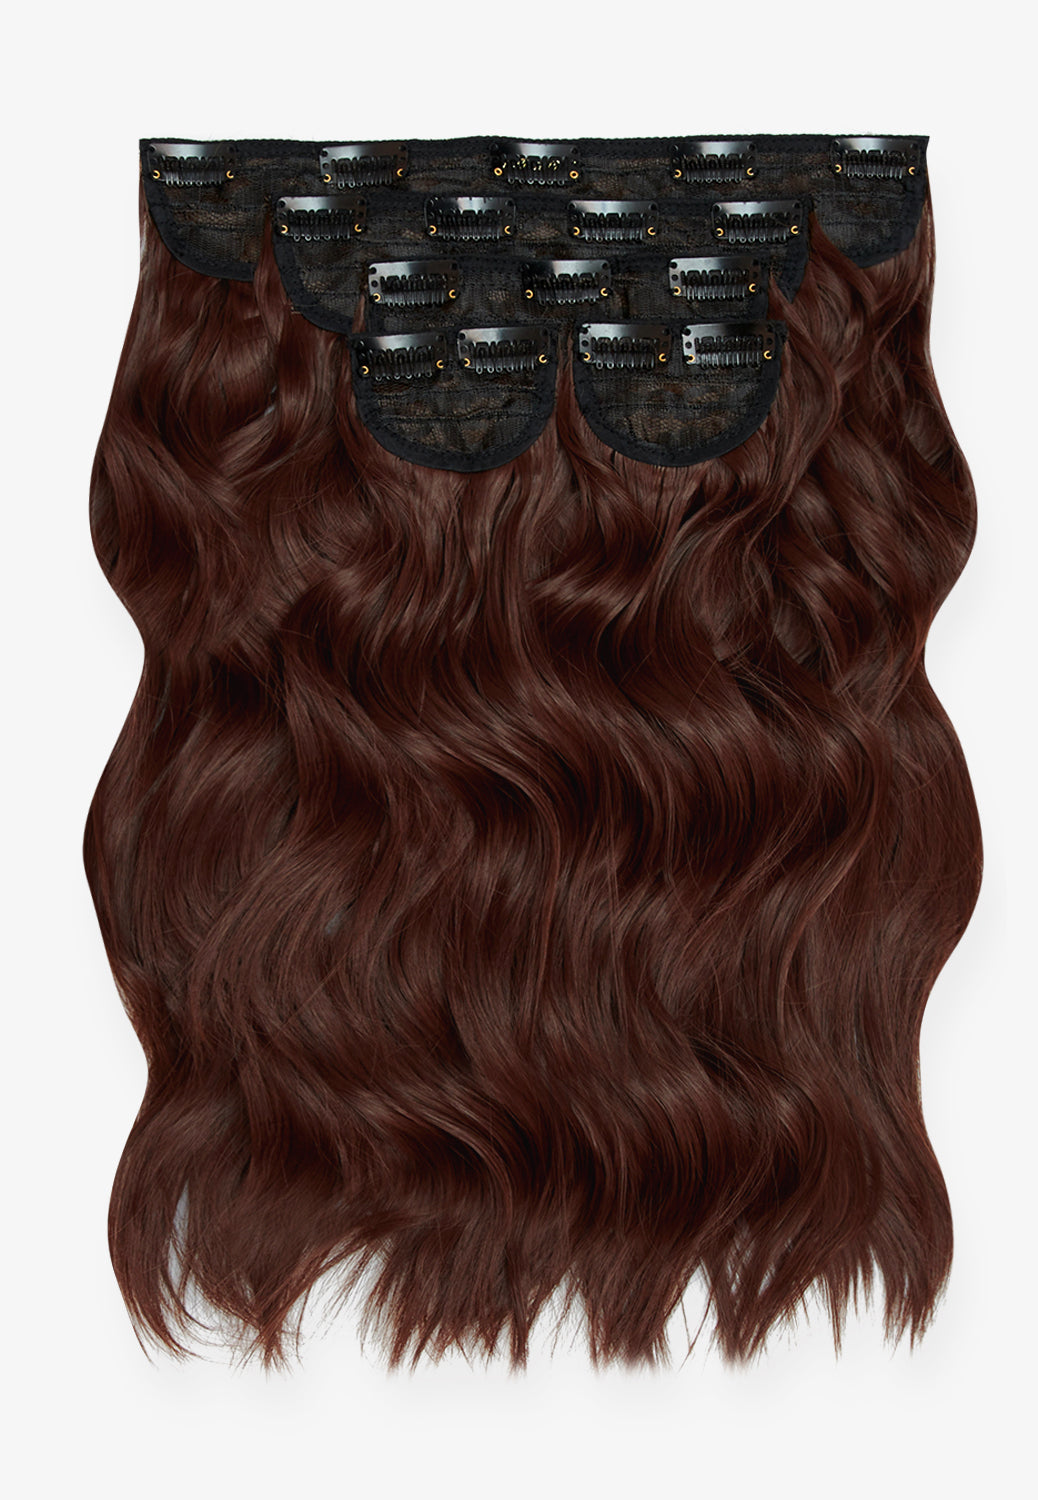 Super Thick 16’’ 5 Piece Brushed Out Wave Clip In Hair Extensions + Hair Care Bundle - Warm Brunette